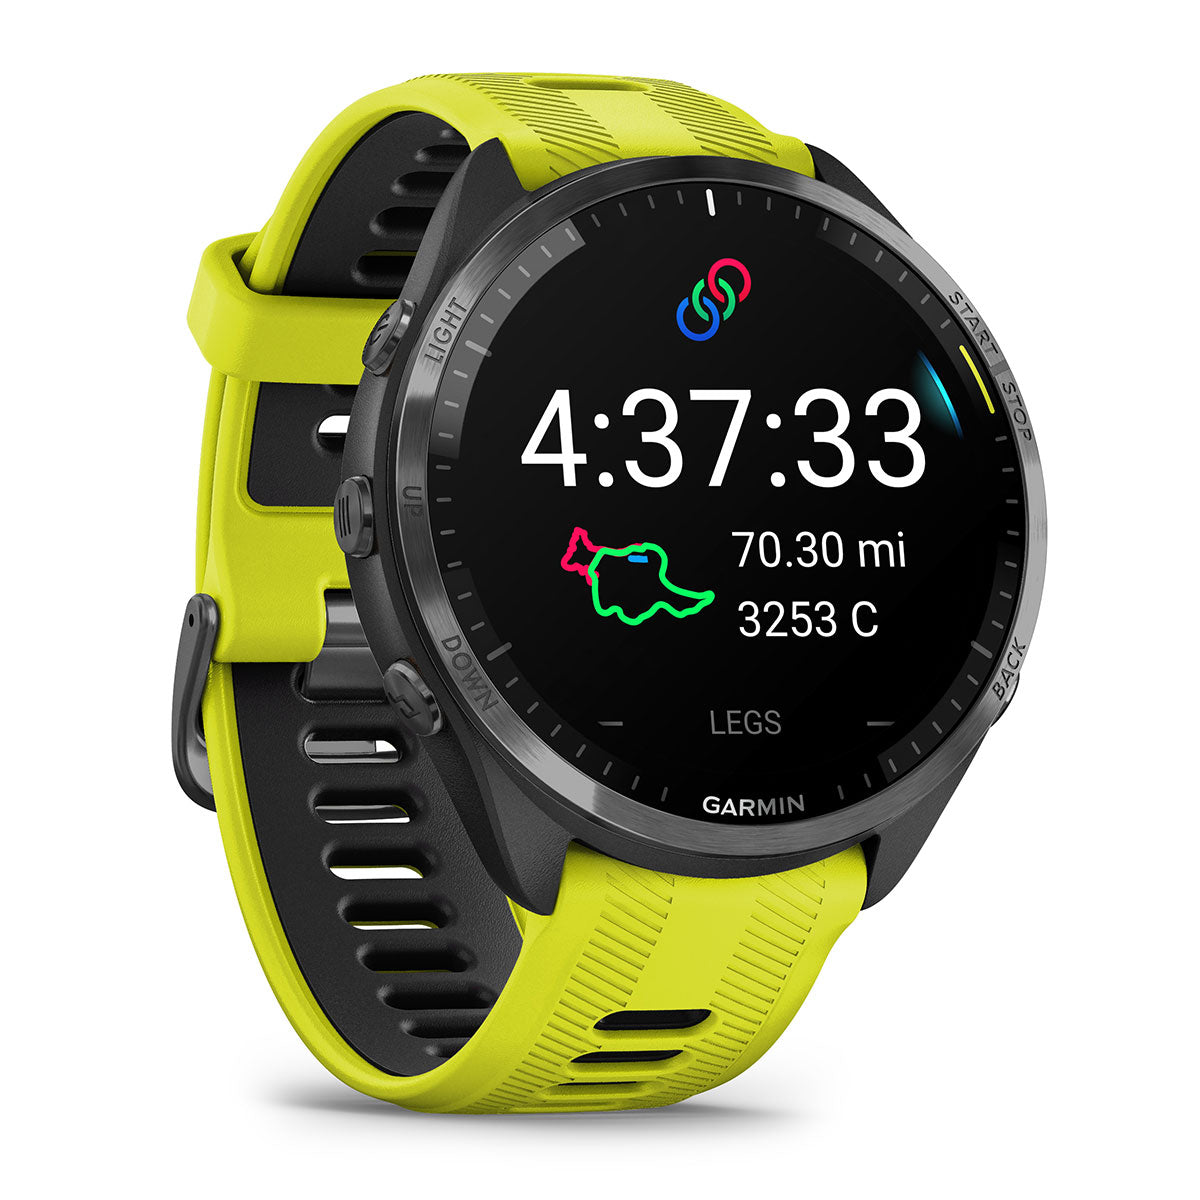 Garmin Forerunner 965 (Amp Yellow/Black) Premium Running & Triathlon GPS Smartwatch | Bundle with PlayBetter Screen Protectors & Portable Charger - image 5 of 7